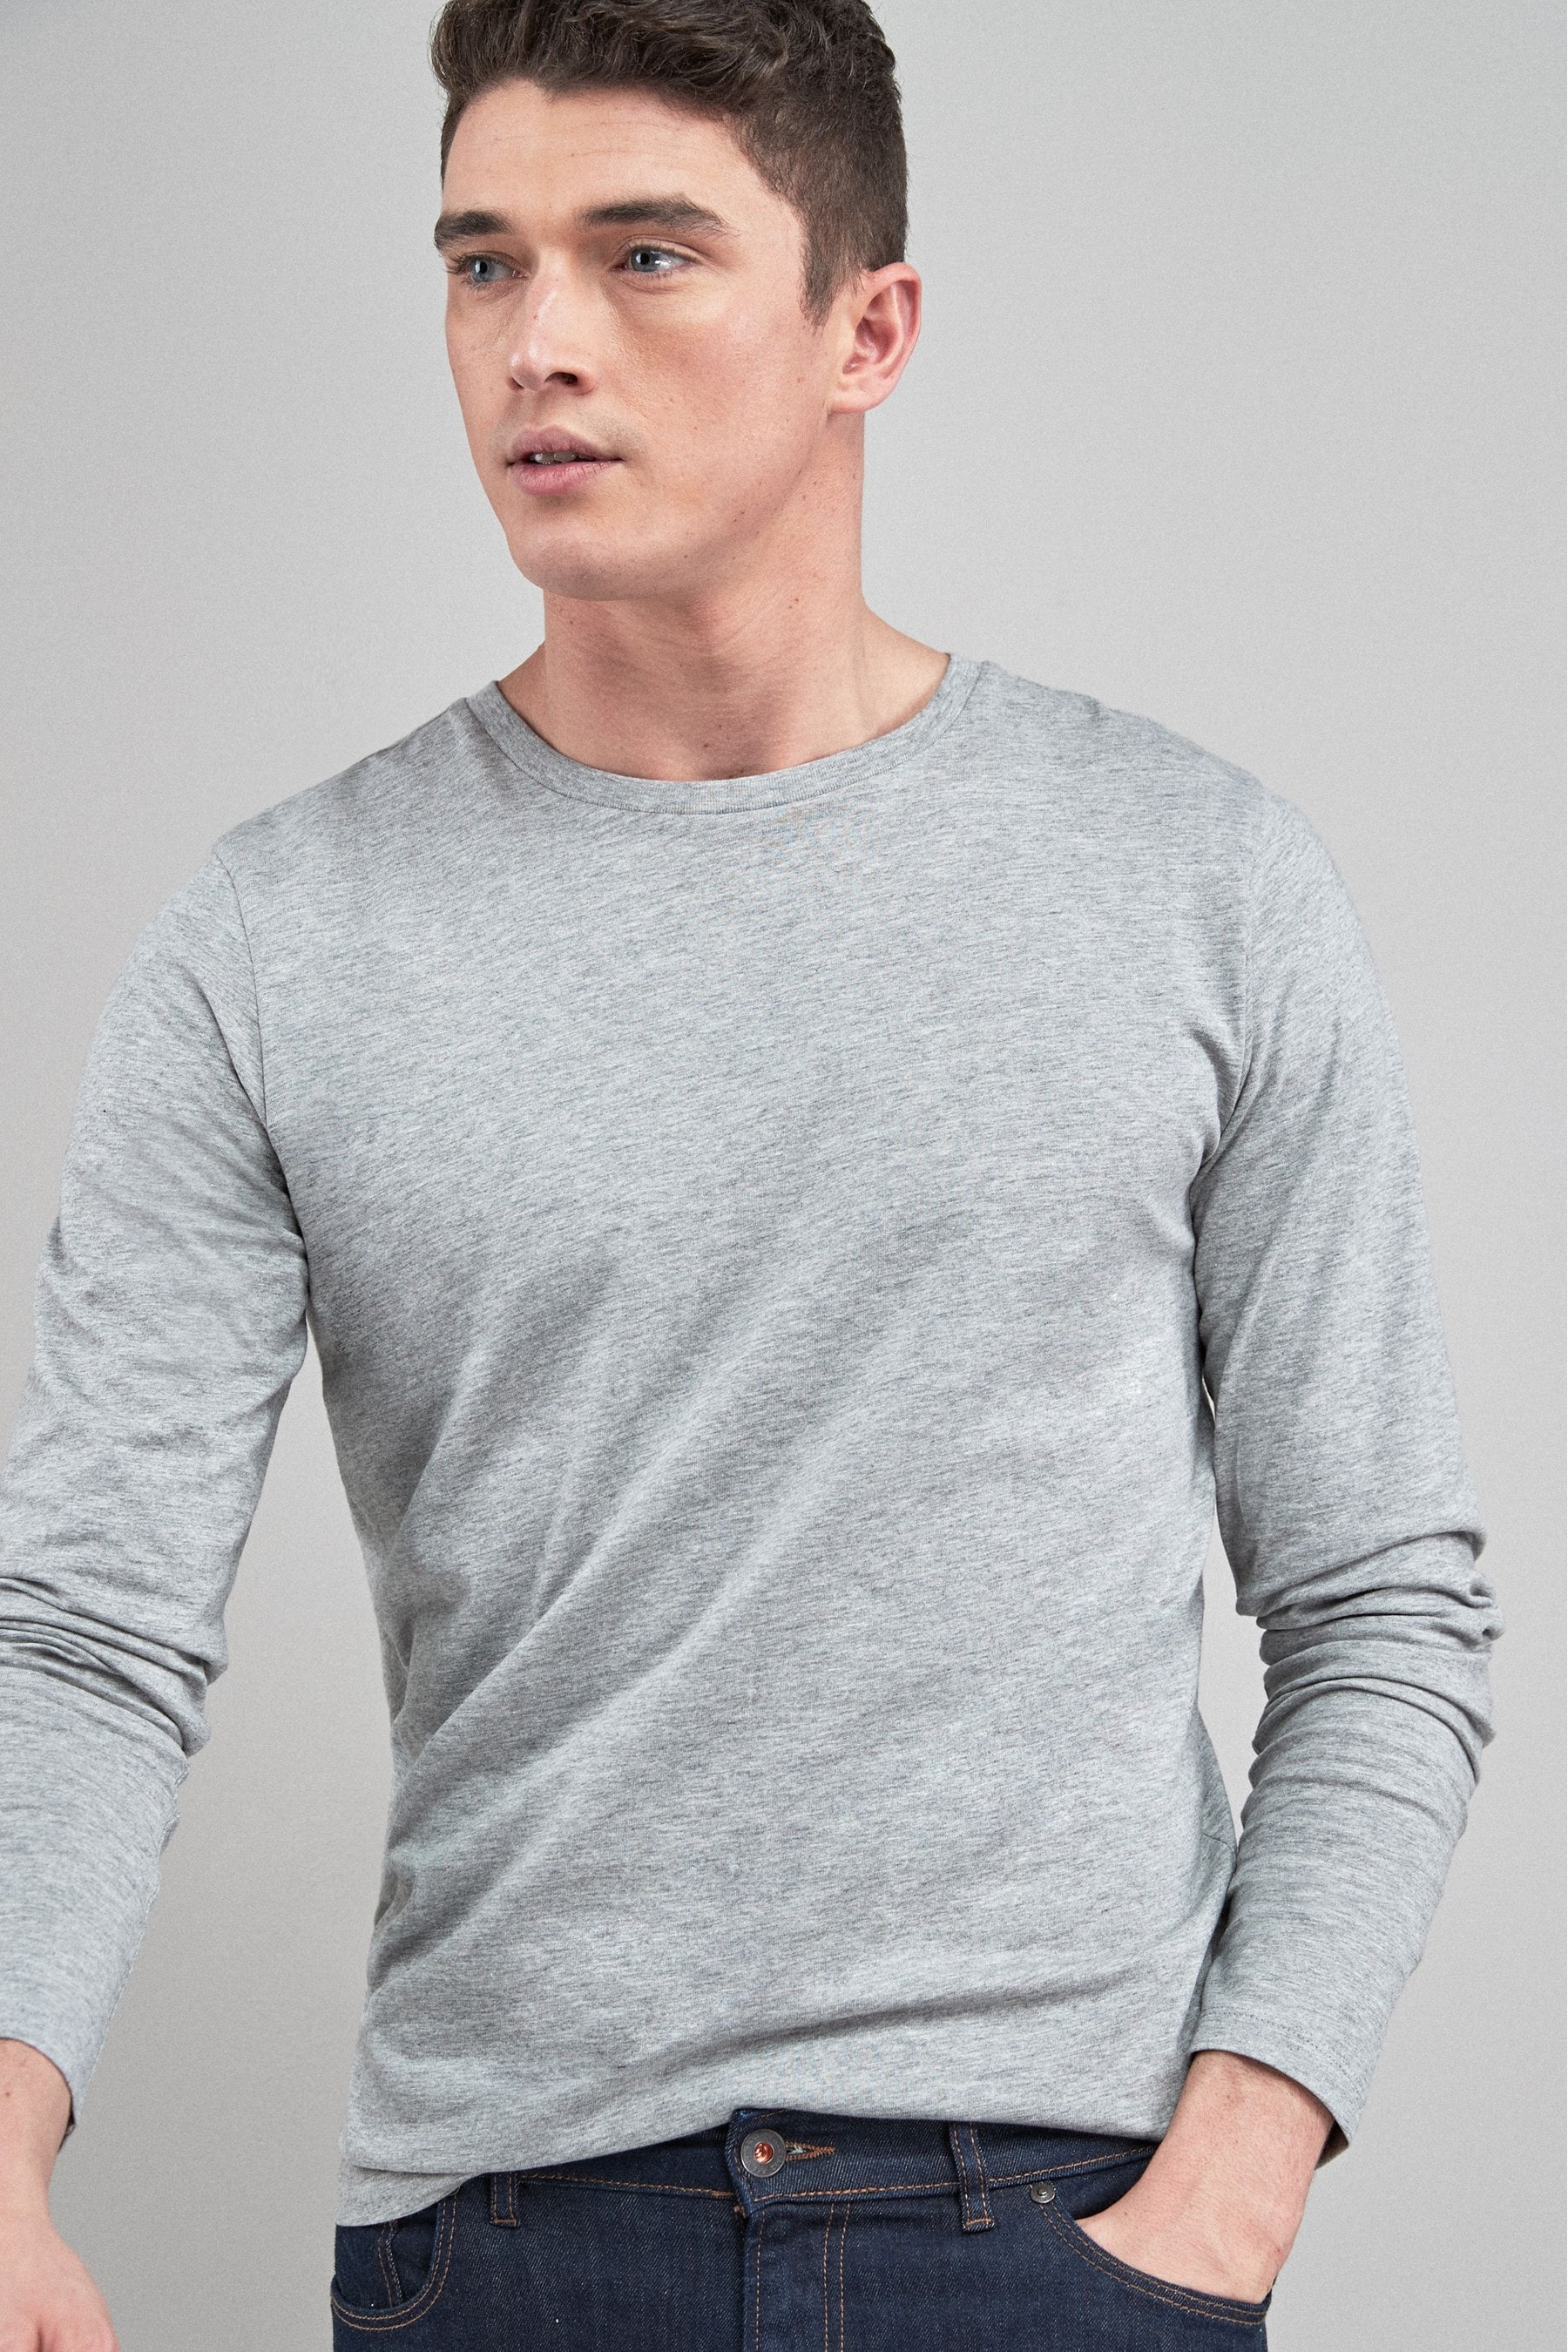 Buy Grey Marl Long Sleeve Crew Neck T-Shirt from the Next UK online shop